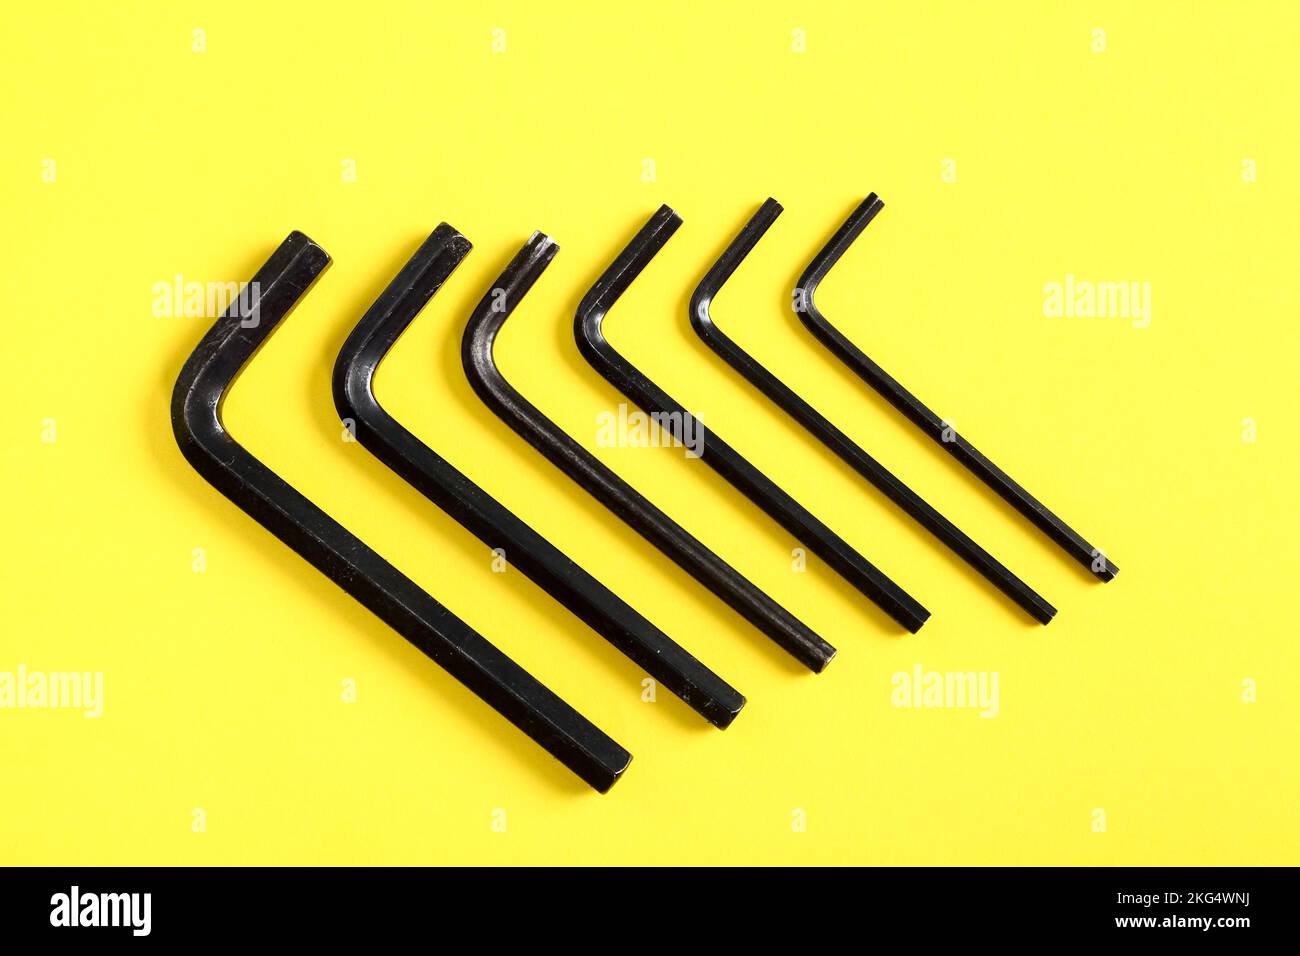 Different sizes of Allan key wrenches close up Stock Photo